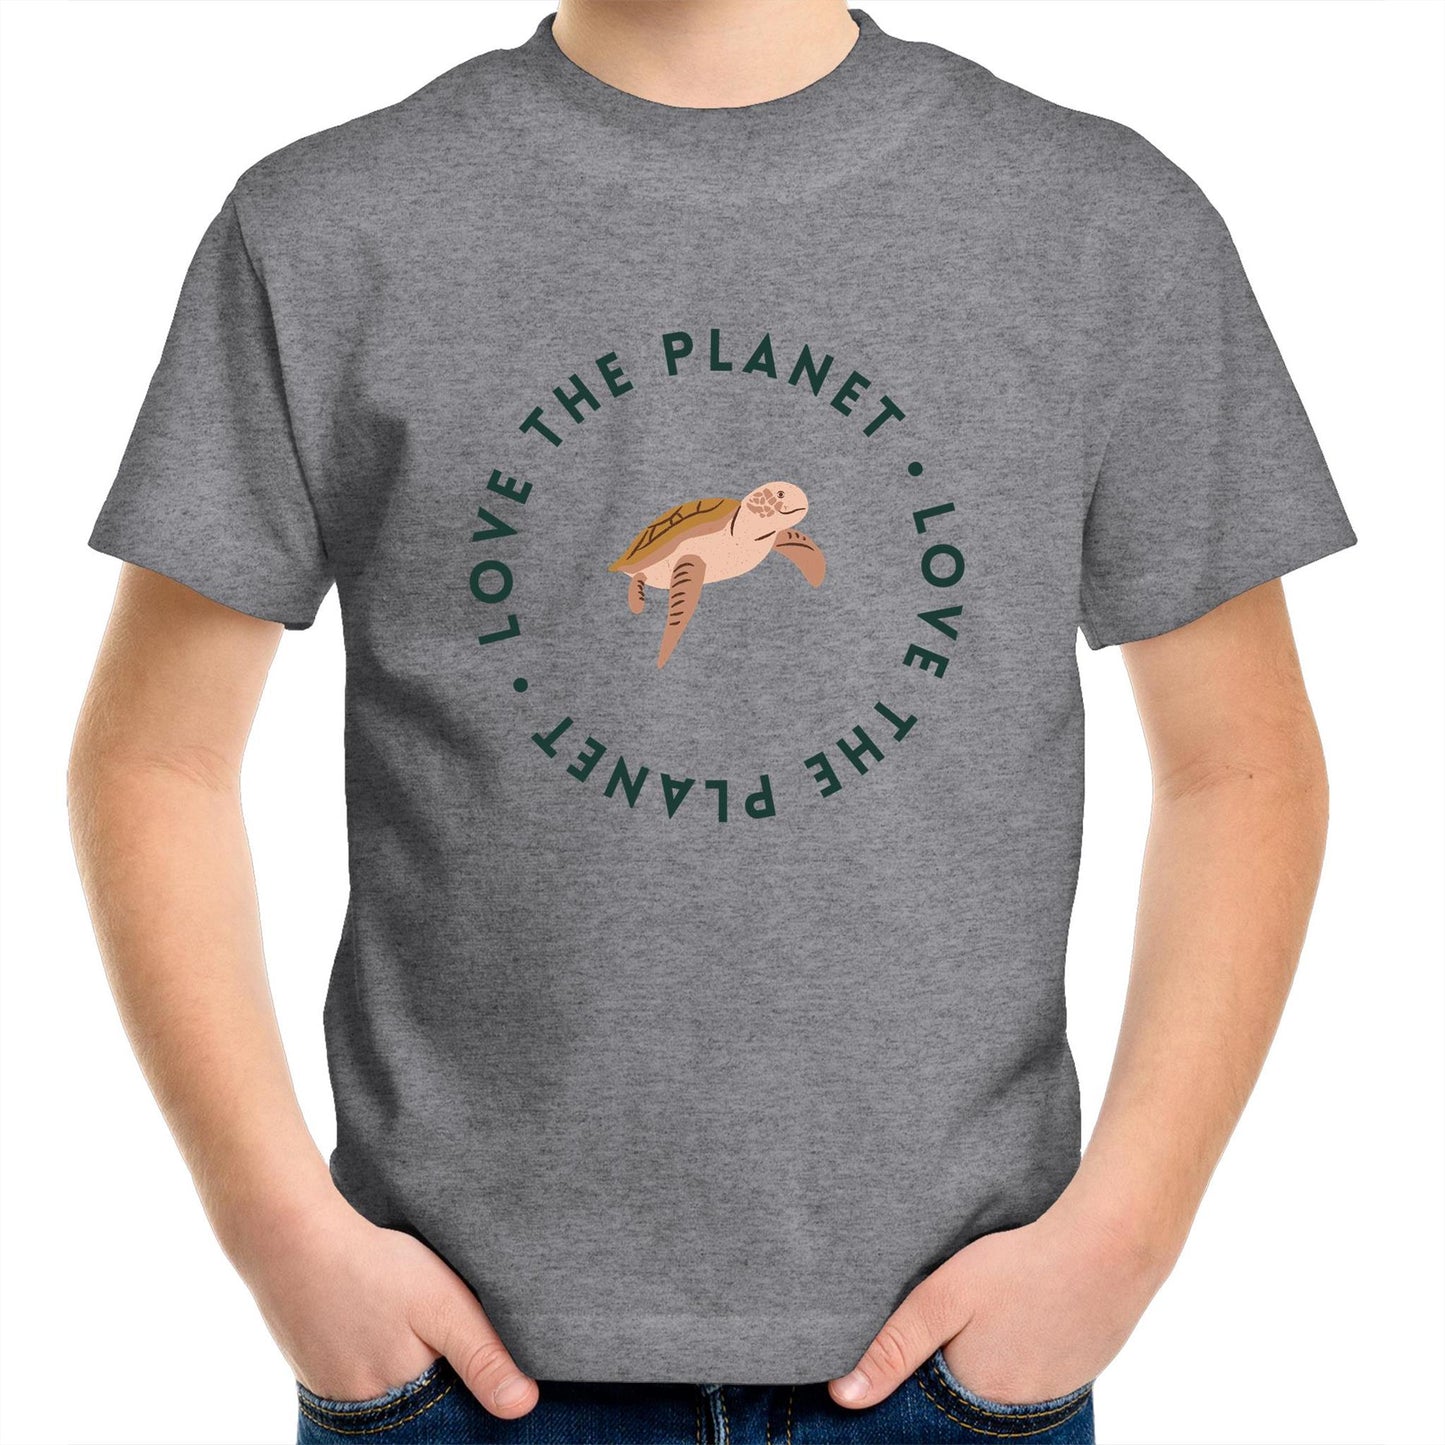 Love The Planet - Kids Youth Crew T-Shirt Grey Marle Kids Youth T-shirt animal Environment